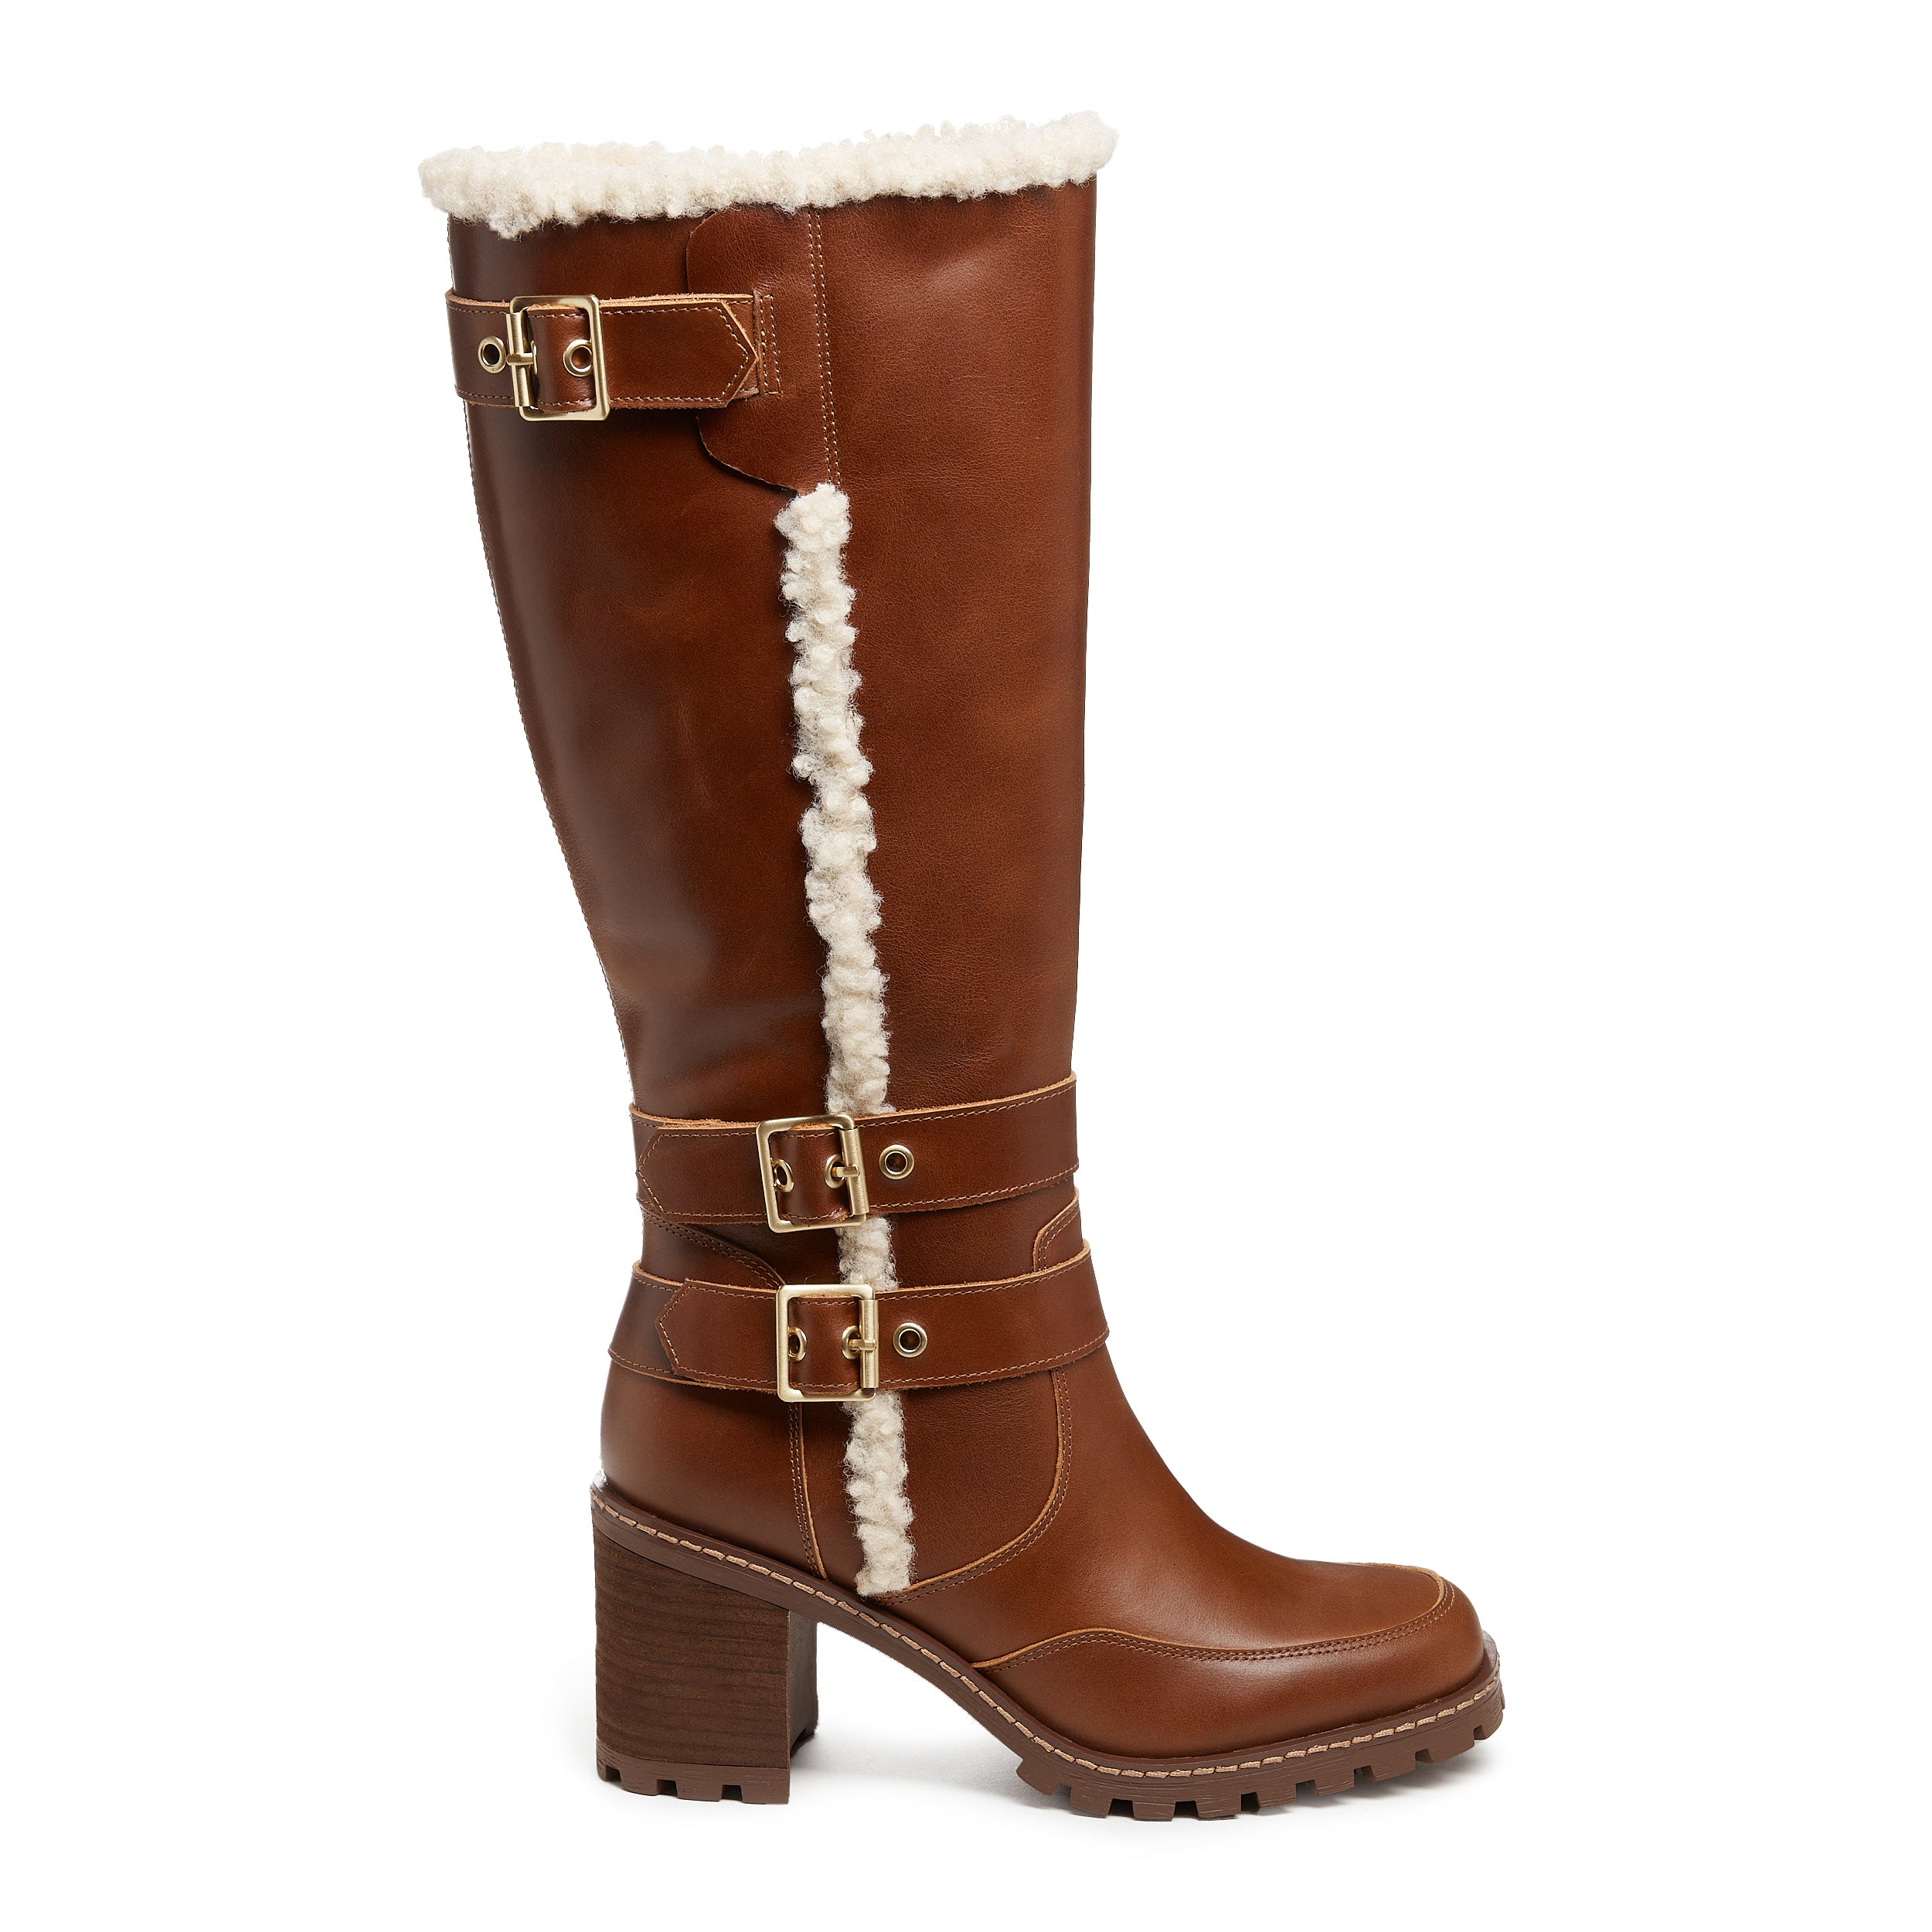 Women's Kraze Hickory Leather Tall Boots by Kelsi Dagger BK®